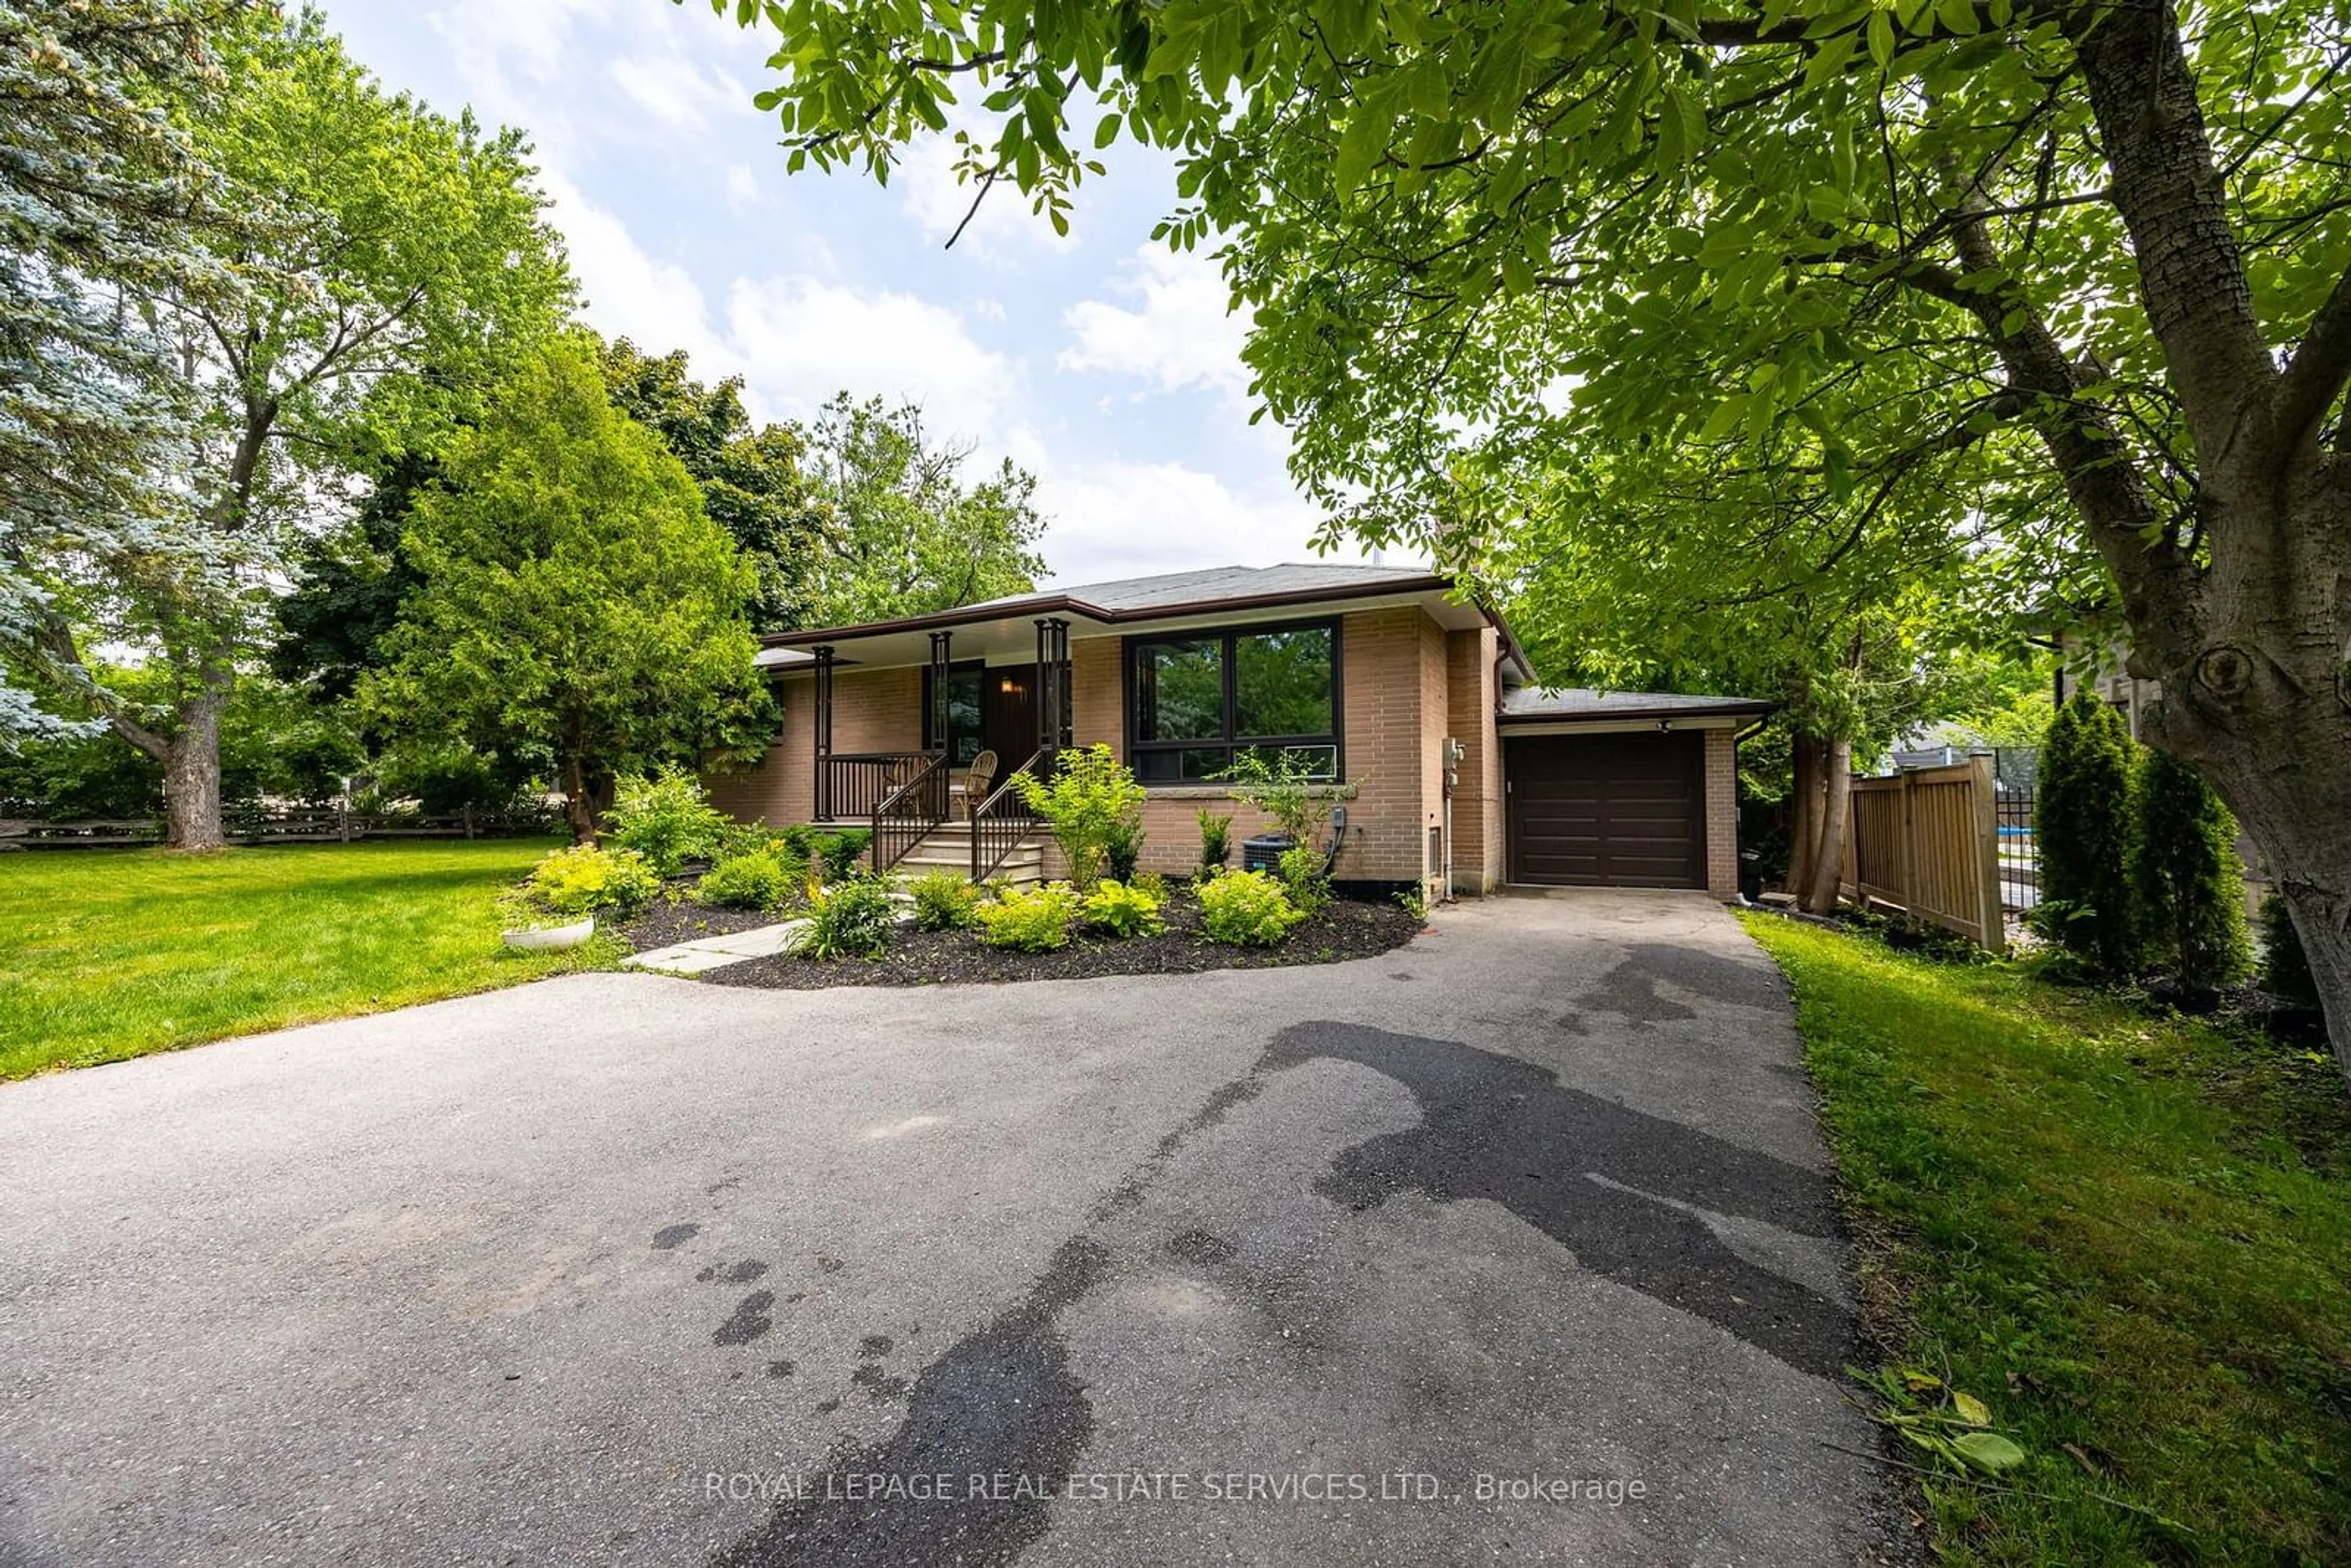 Home with brick exterior material for 1 Naylon St, Vaughan Ontario L6A 3Y3